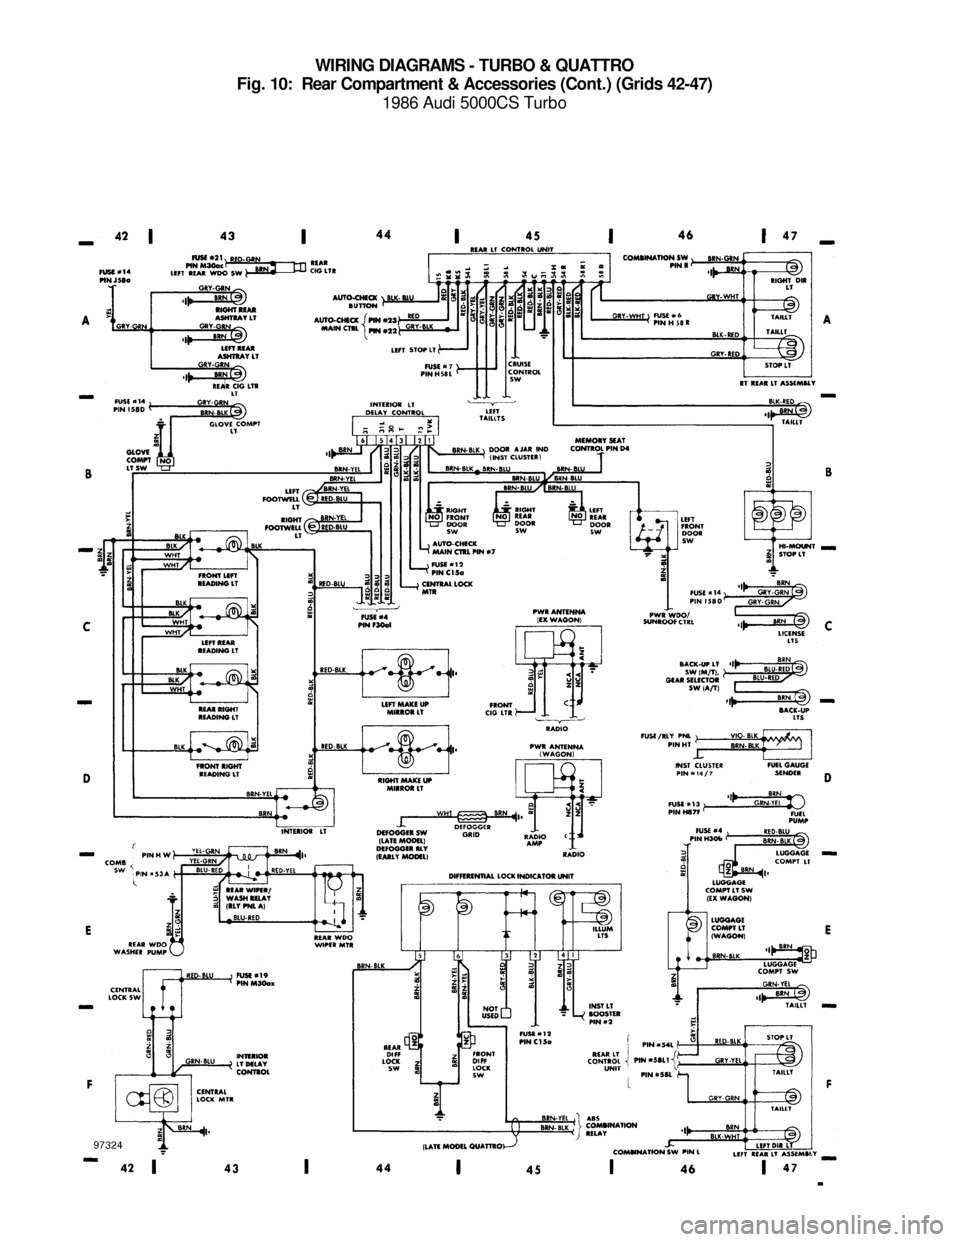 AUDI 5000CS 1986 C2 System Wiring Diagram WIRING DIAGRAMS - TURBO & QUATTRO
Fig. 10:  Rear Compartment & Accessories (Cont.) (Grids 42-47)
1986 Audi 5000CS Turbo
For x    
Copyright © 1998 Mitchell Repair Information Company, LLCMonday, July